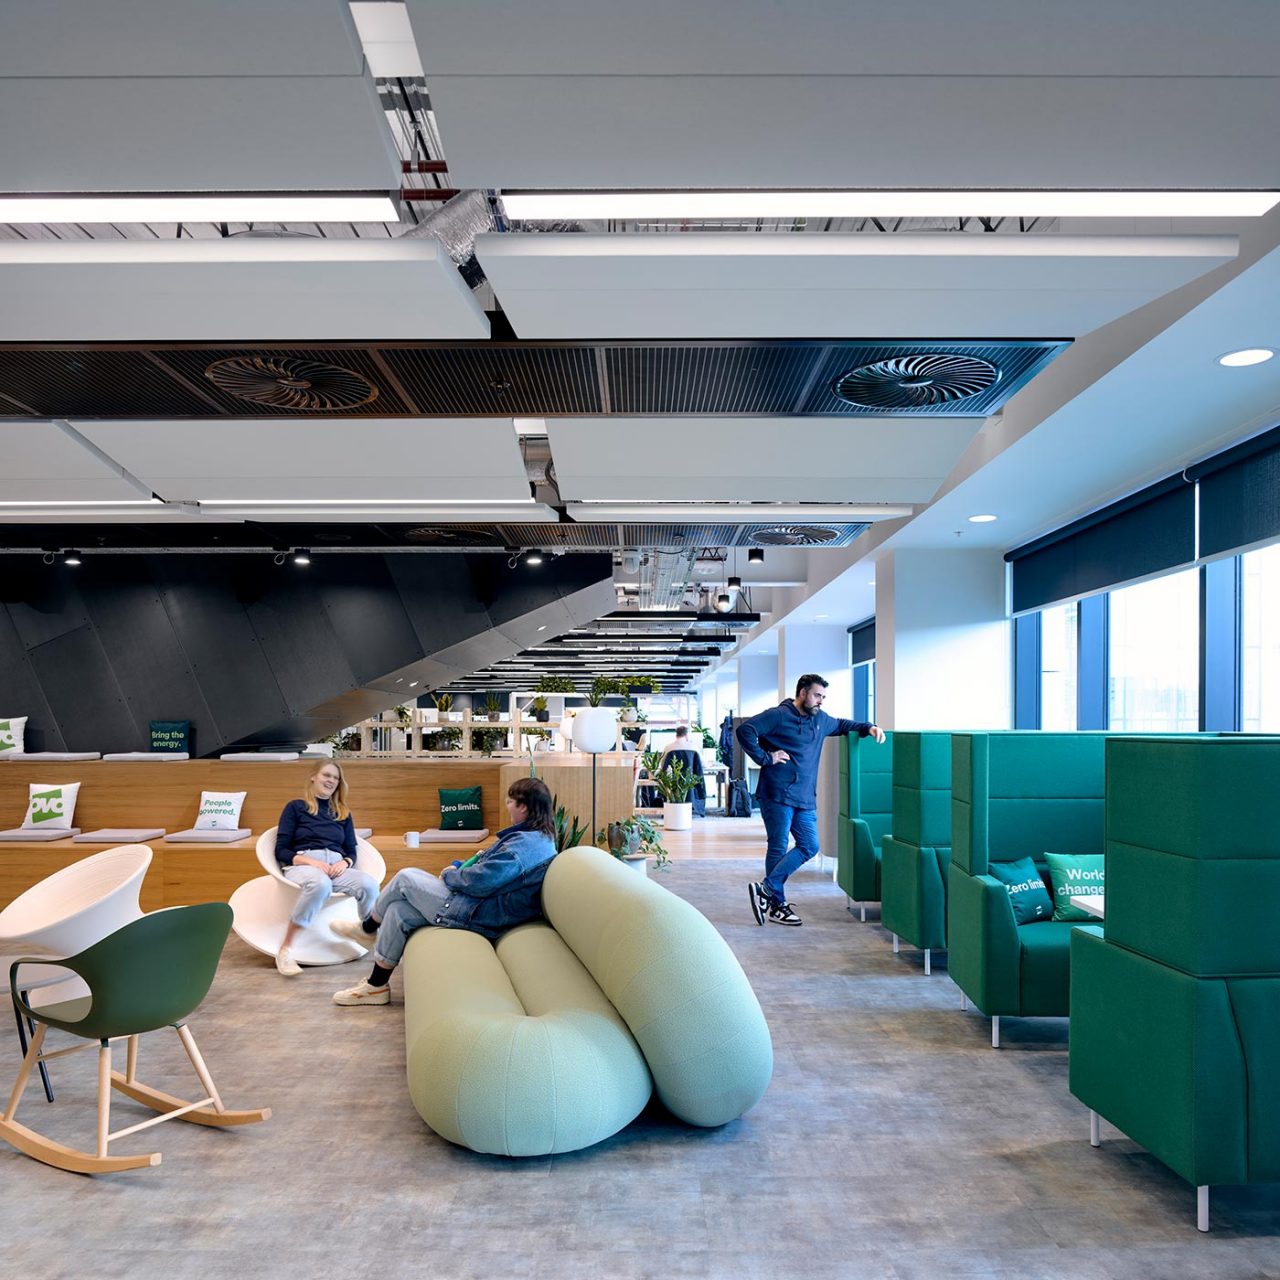 Green loop sofa in the foreground and a variety of furniture and office pods with people lounging or standing in the spaces